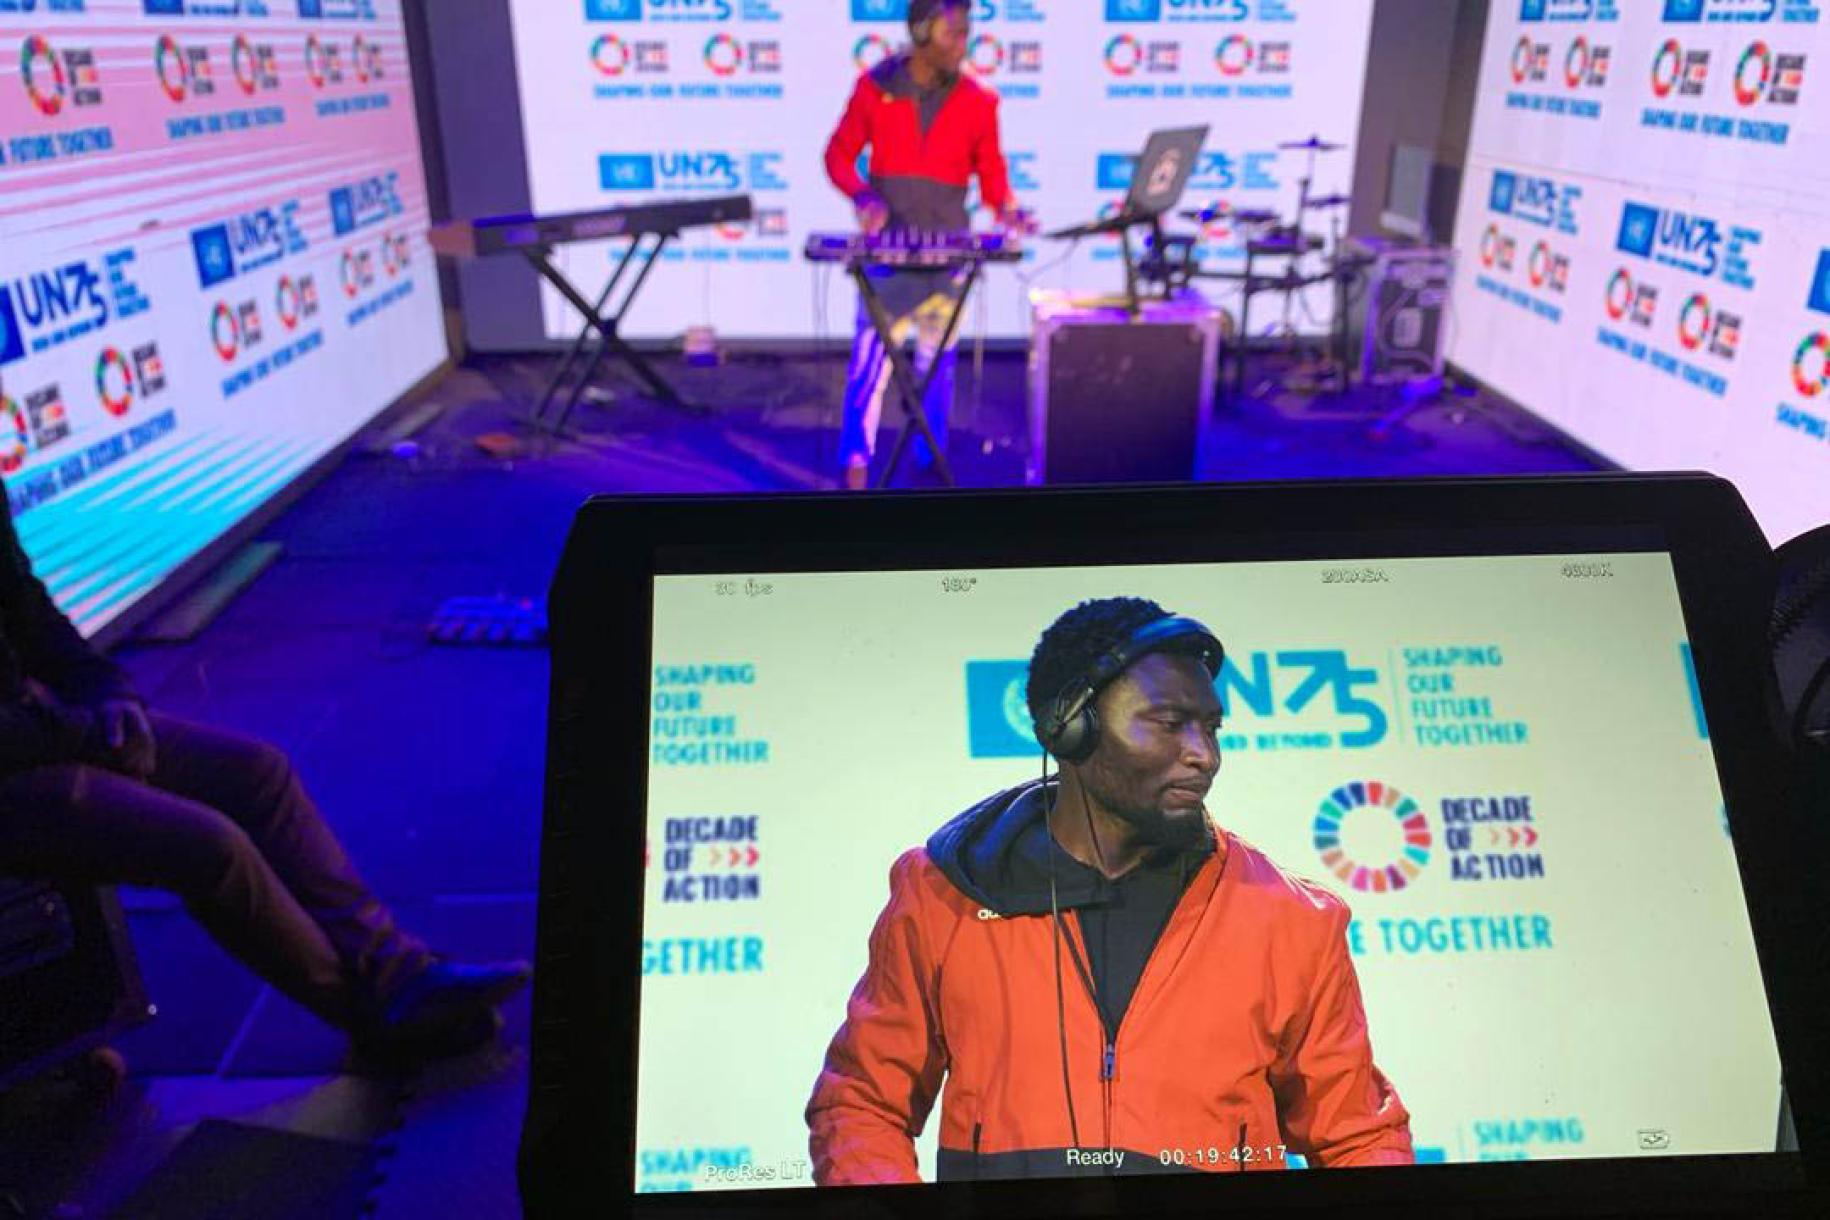 DJ Yayos performs while being recorded. The photo shows him in the background with an image of him on an screen in the foreground.